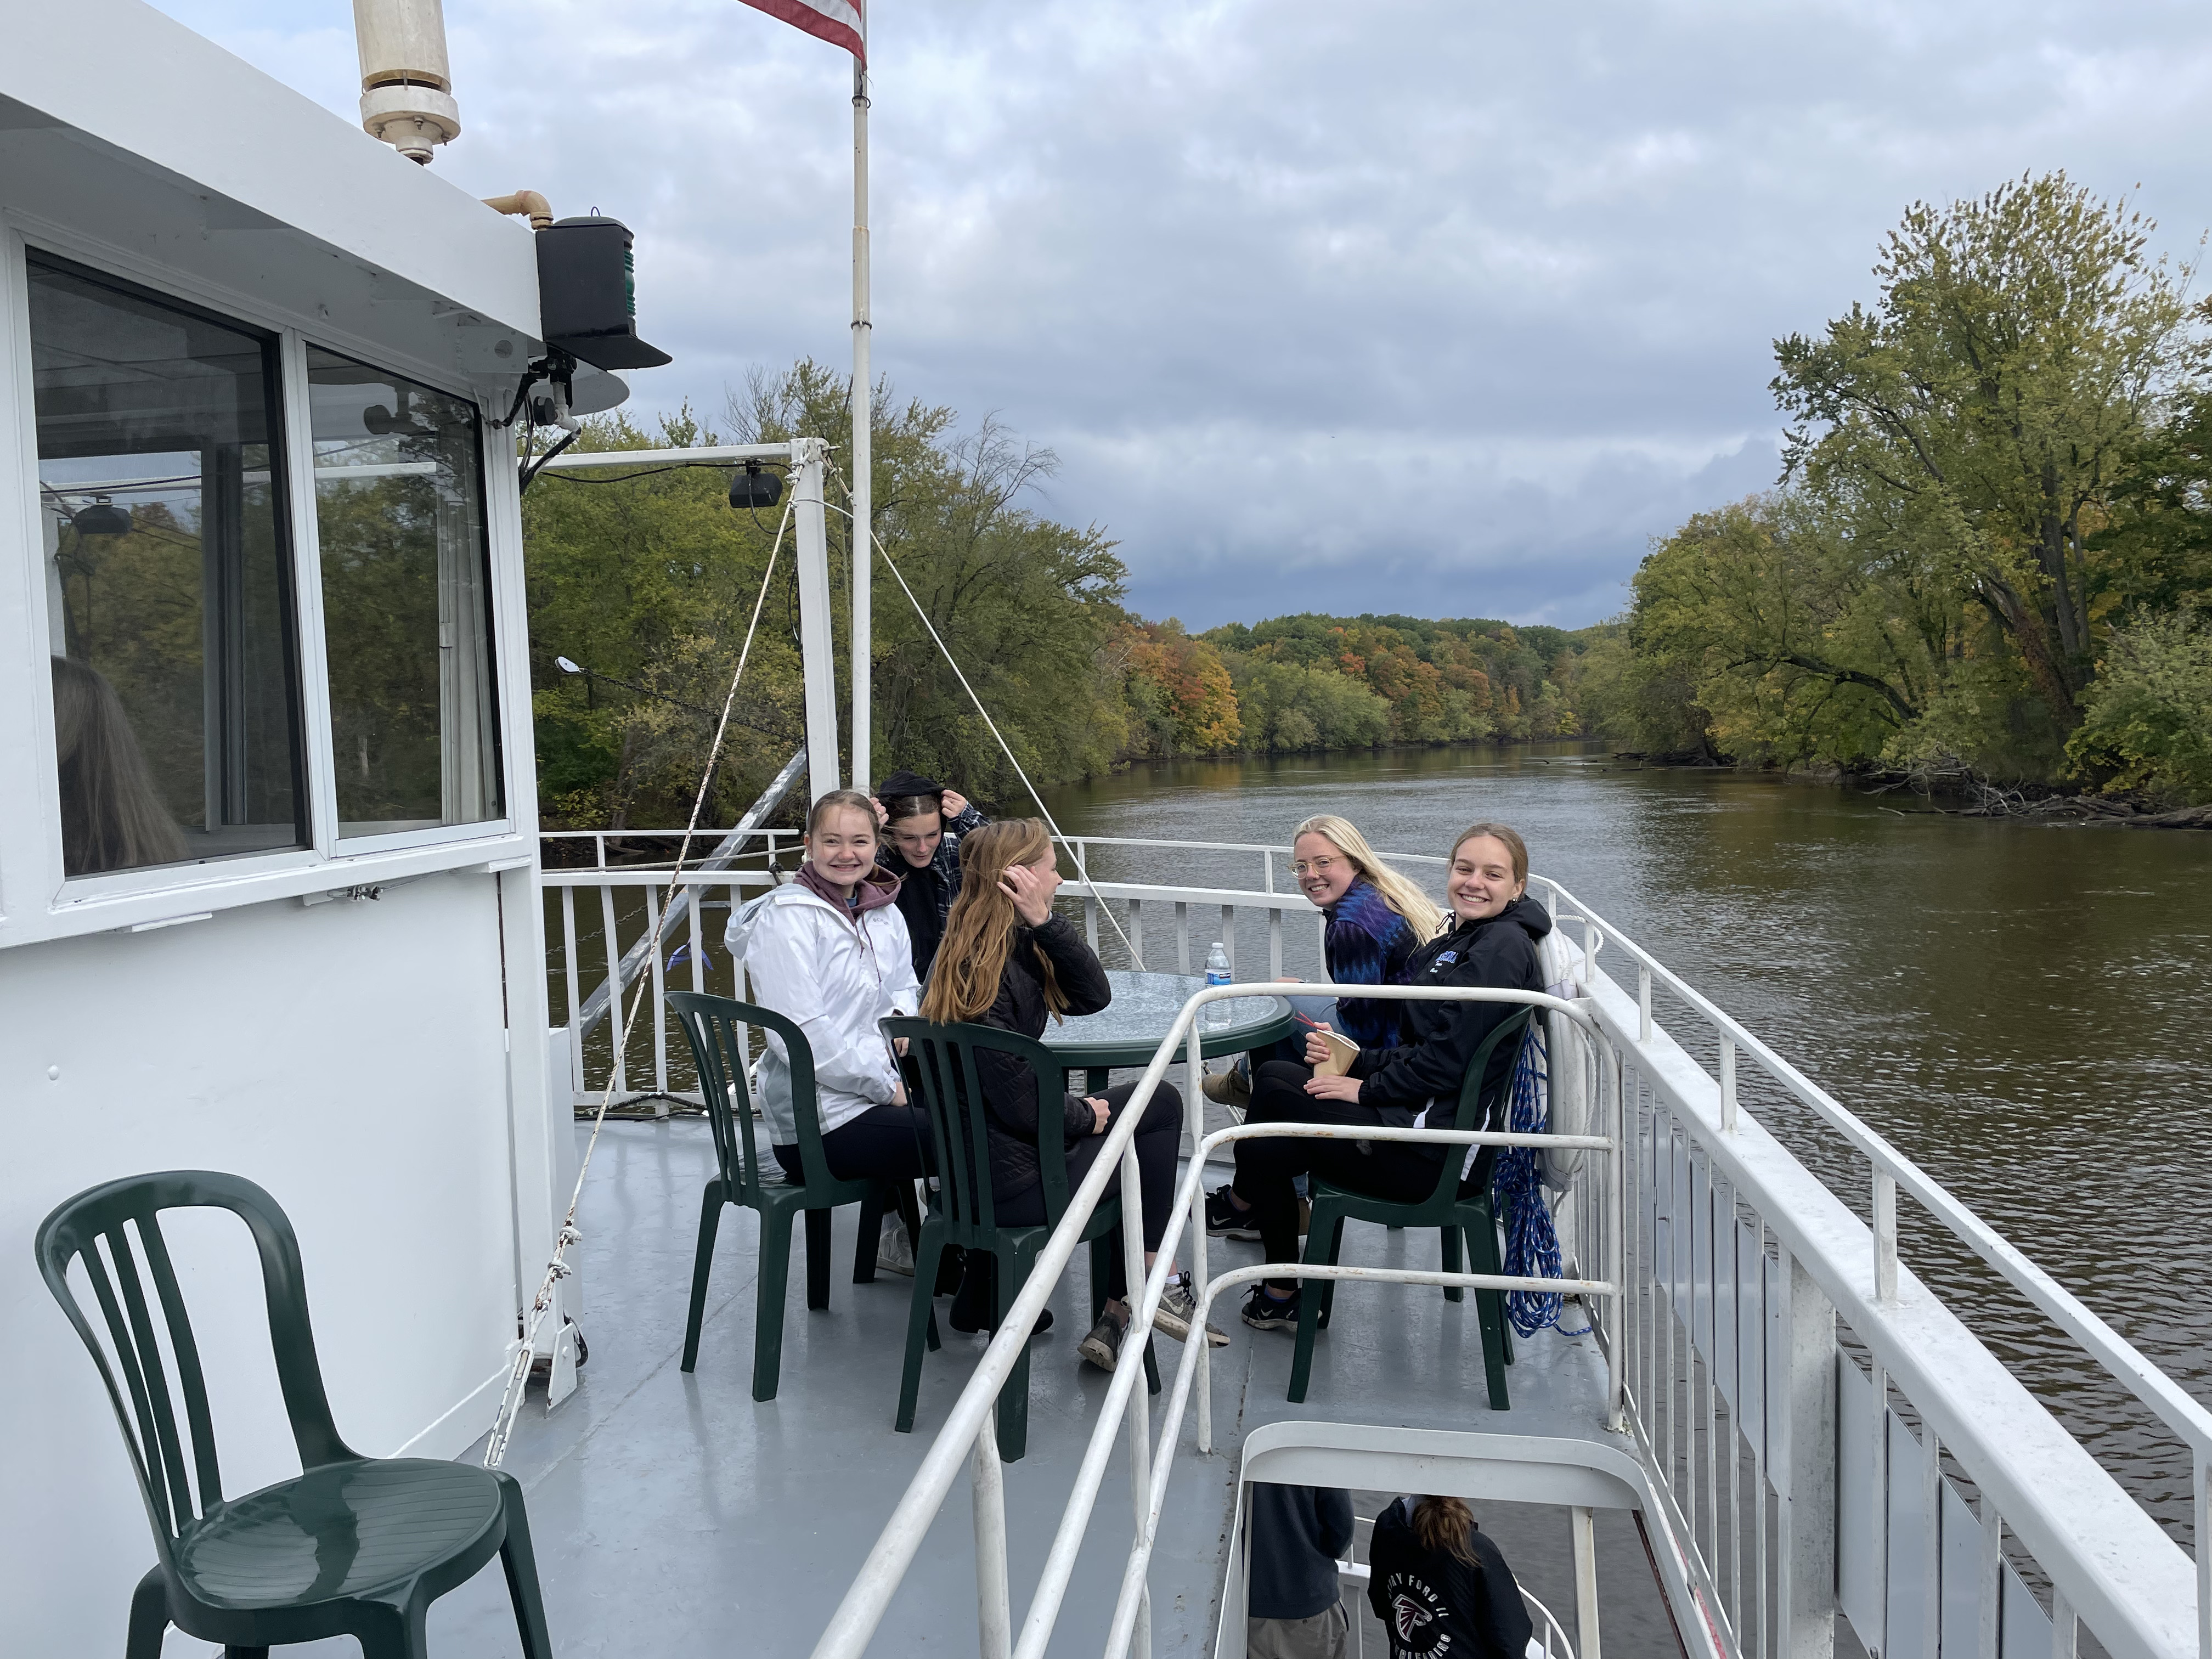 River boat tour: history and science of the Lower Grand River, MI.